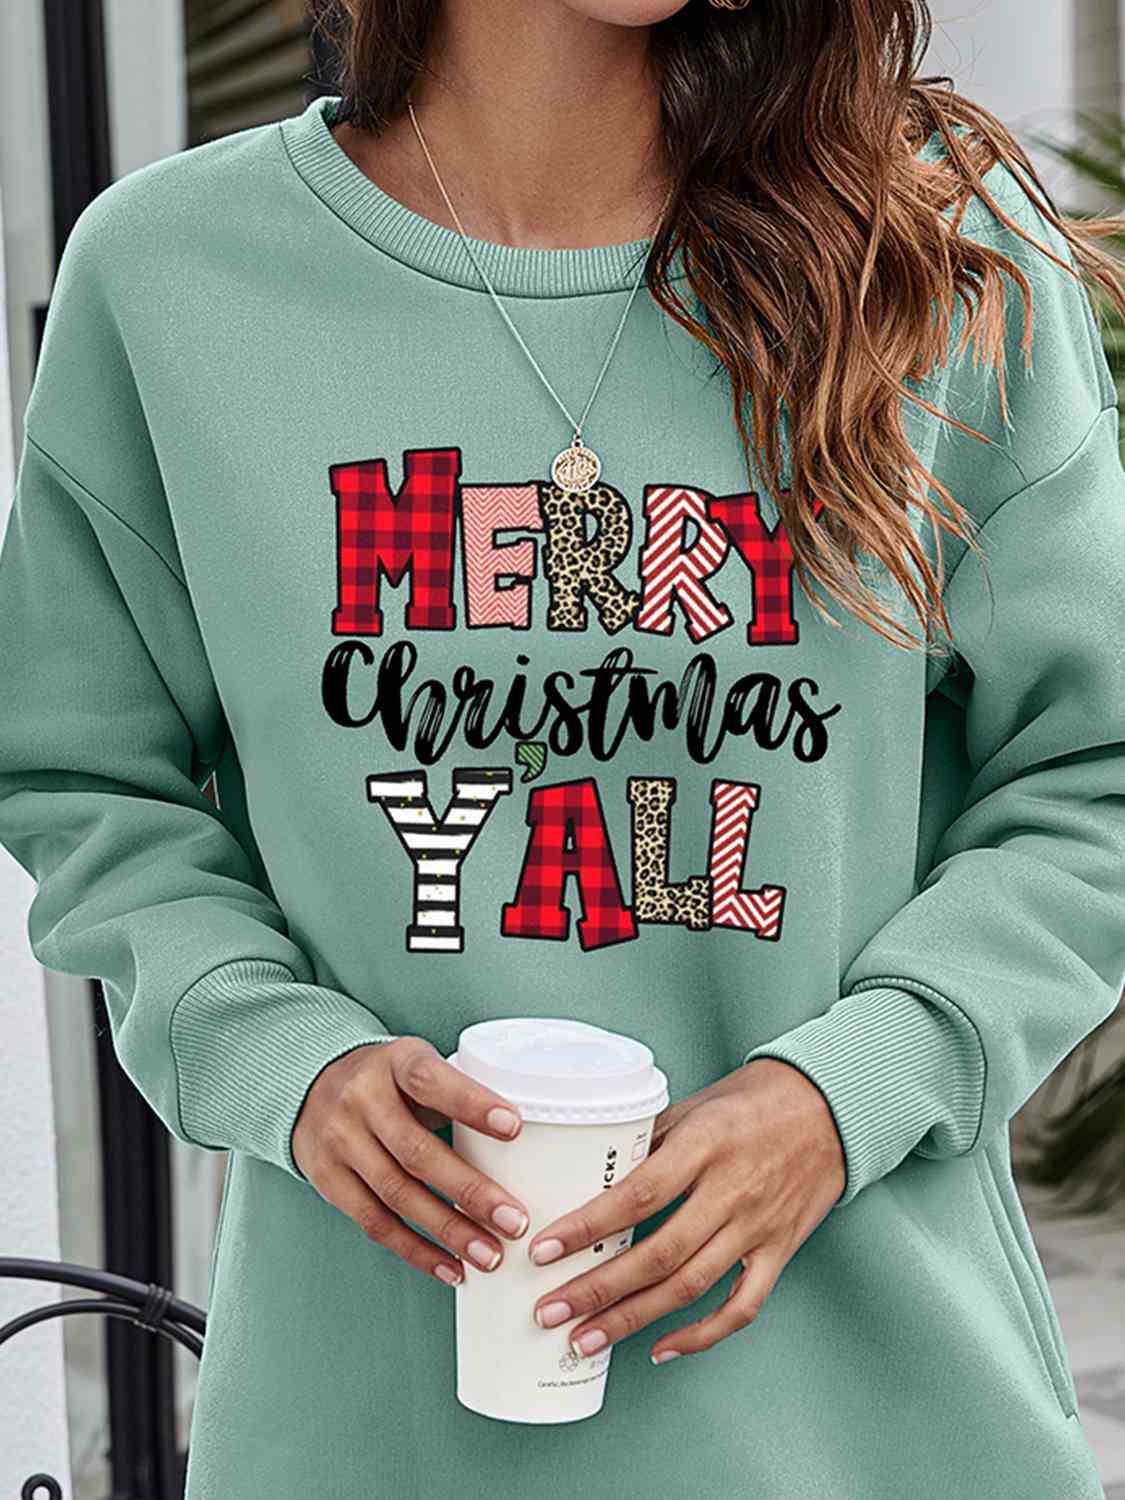 MERRY CHRISTMAS Y'ALL Graphic Sweatshirt | CLOTHING,SHOES & ACCESSORIES | Changeable, christmas, Ship From Overseas, sweatshirt | Trendsi